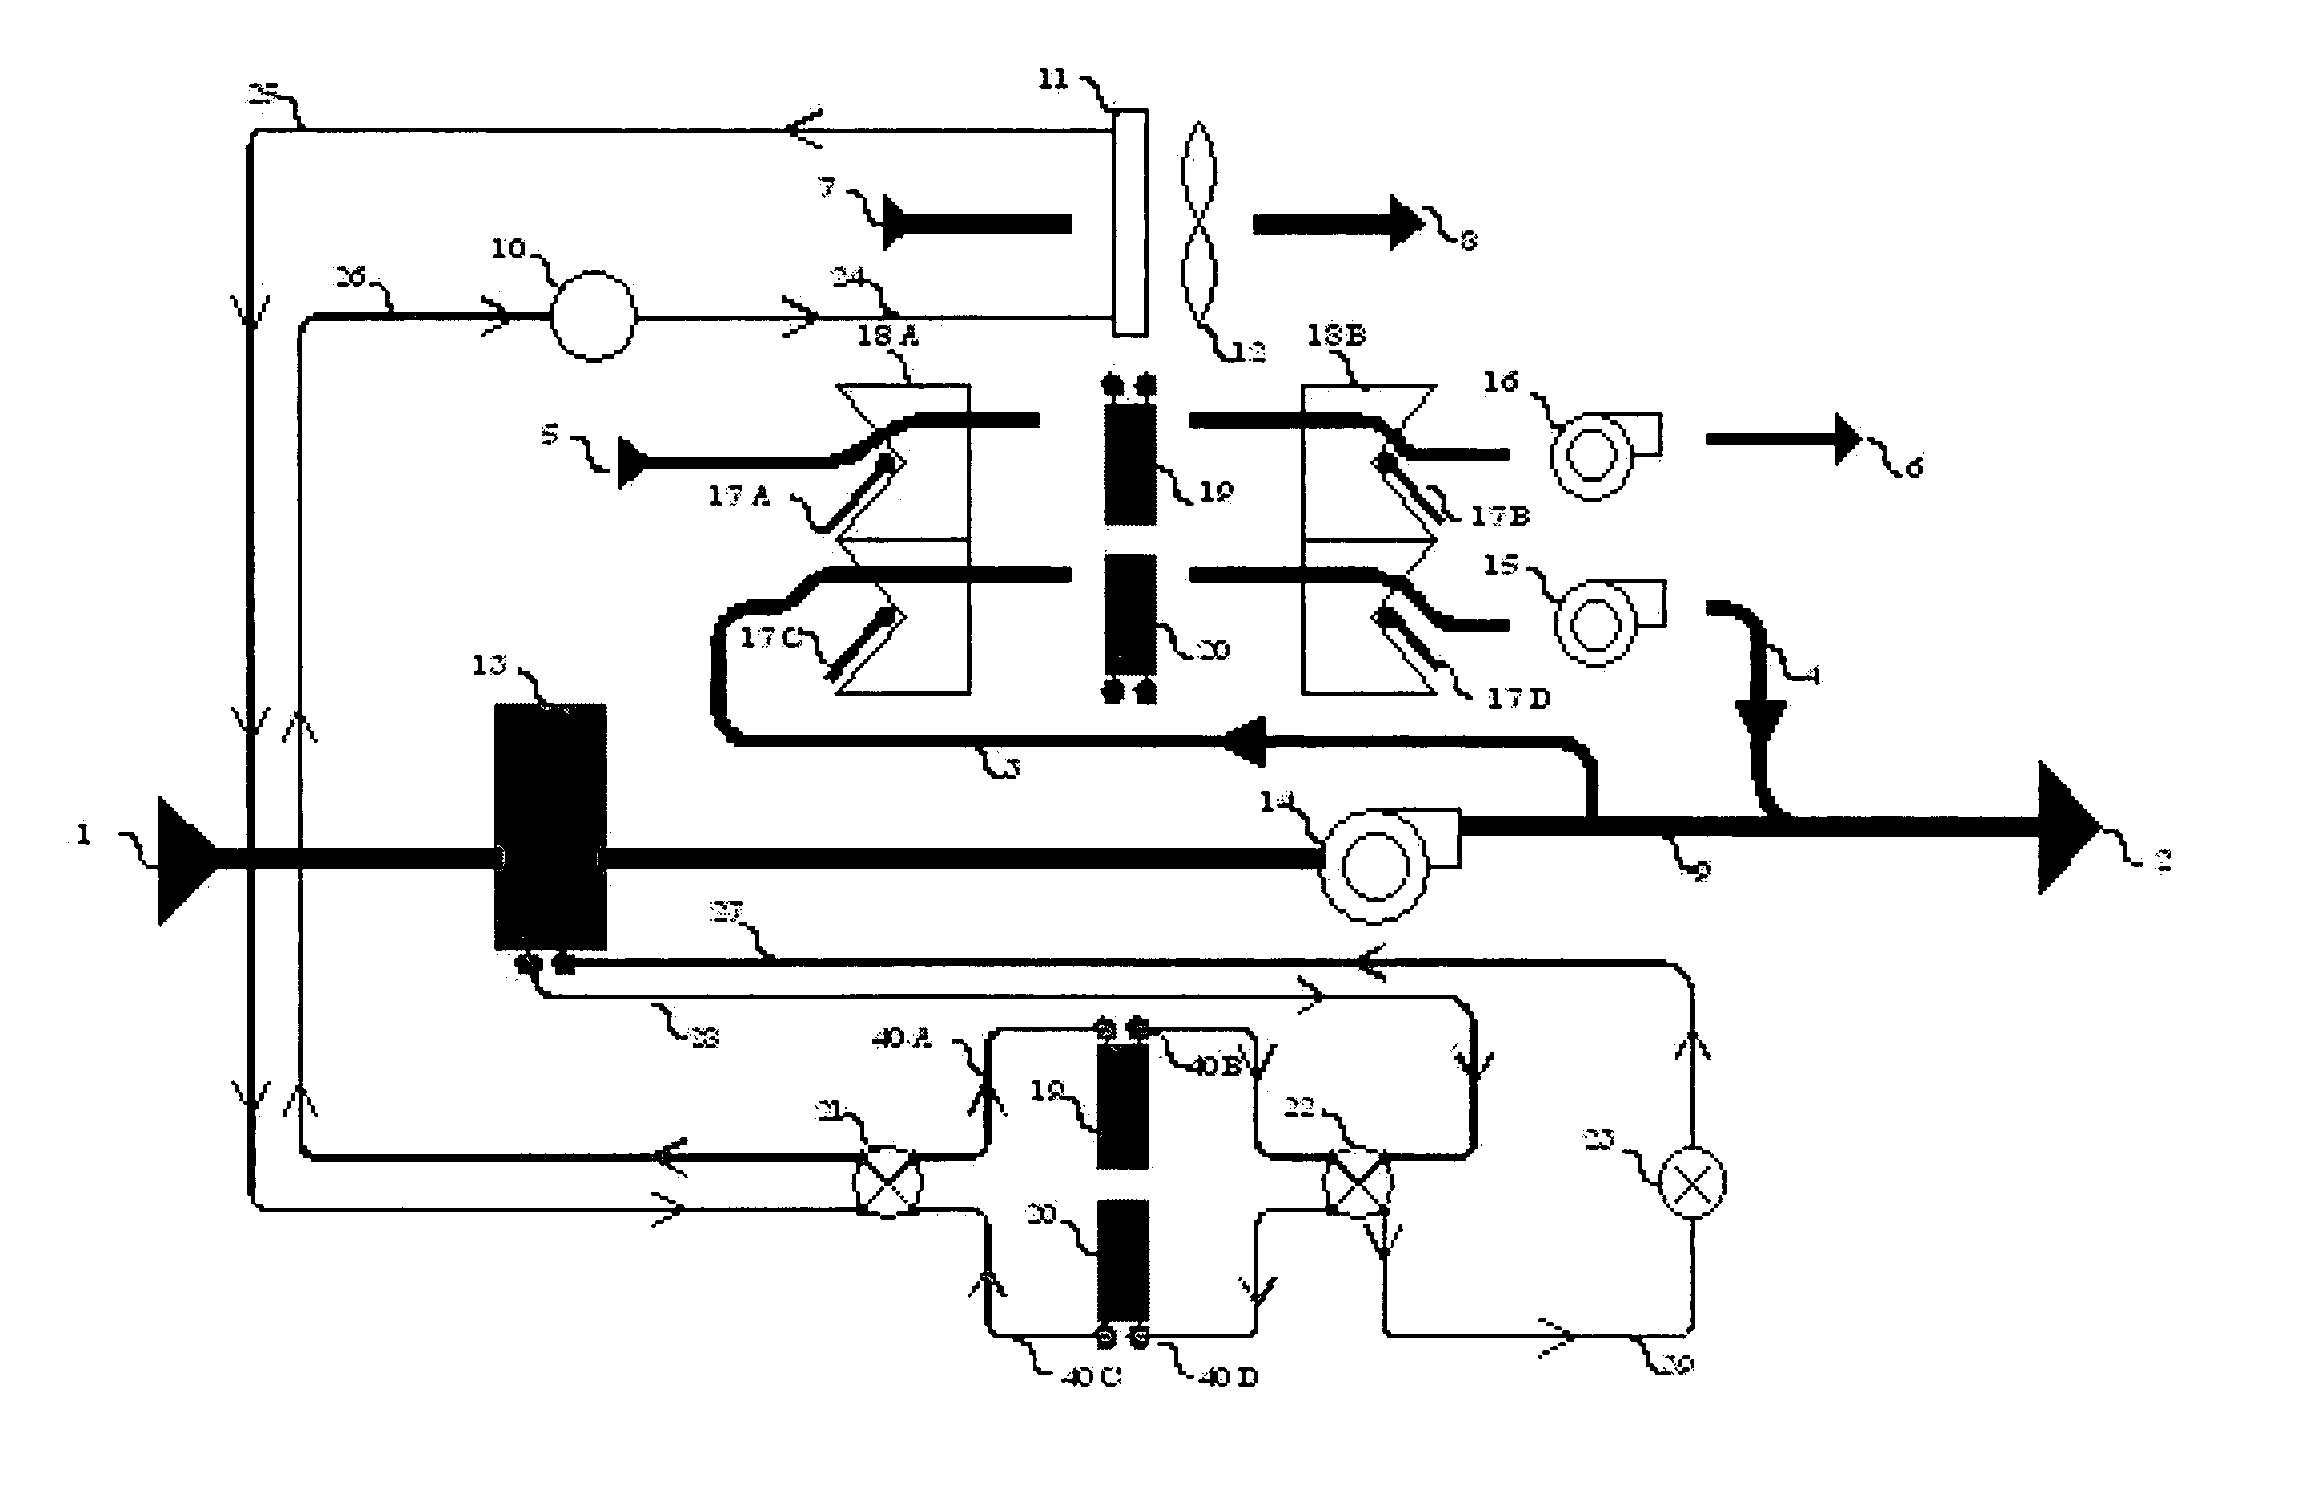 Desiccant-assisted air conditioning system and process